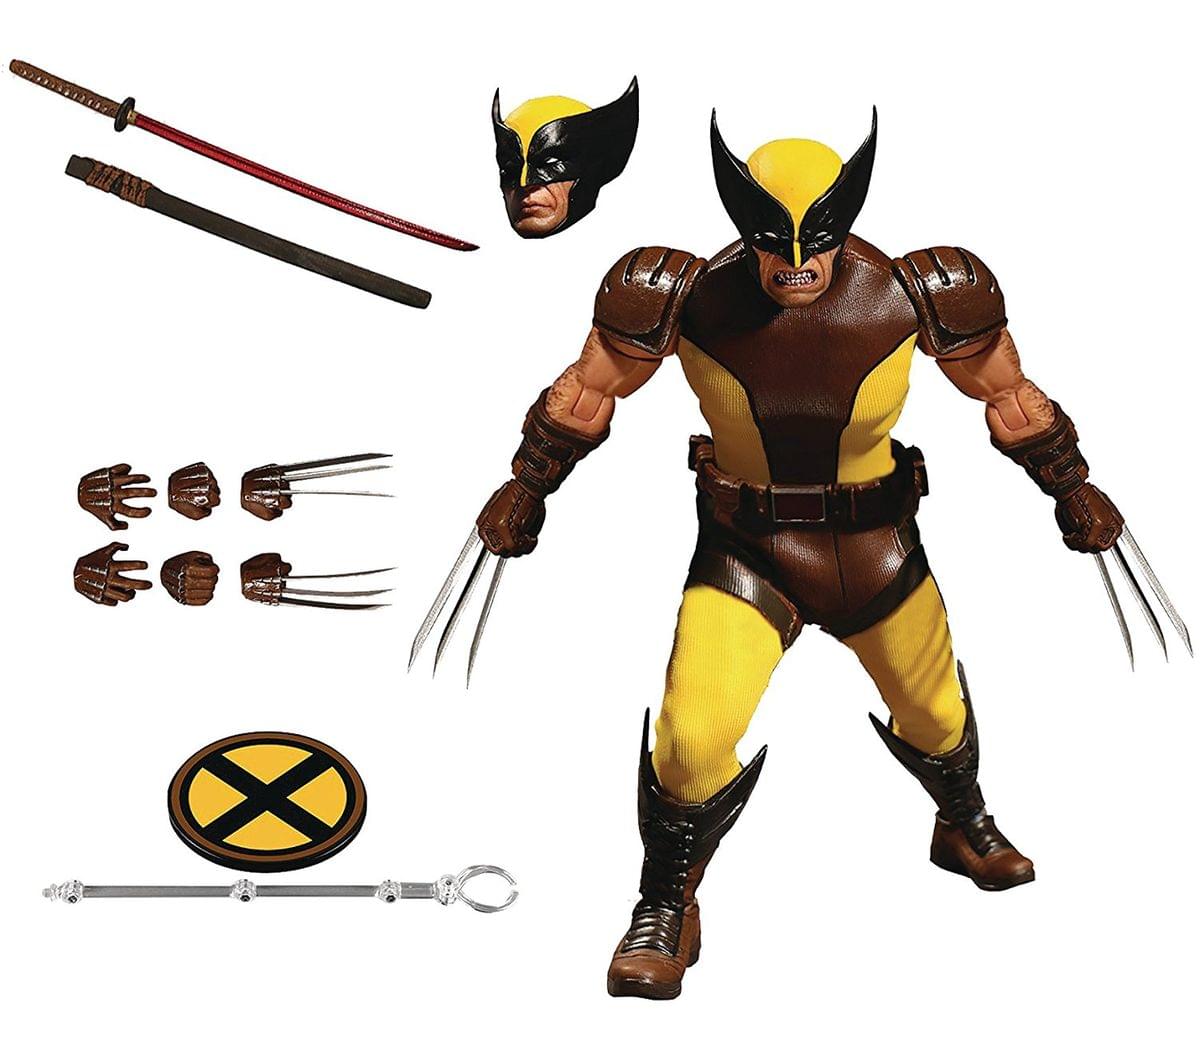 Marvel One:12 Collective 6" Action Figure: Wolverine